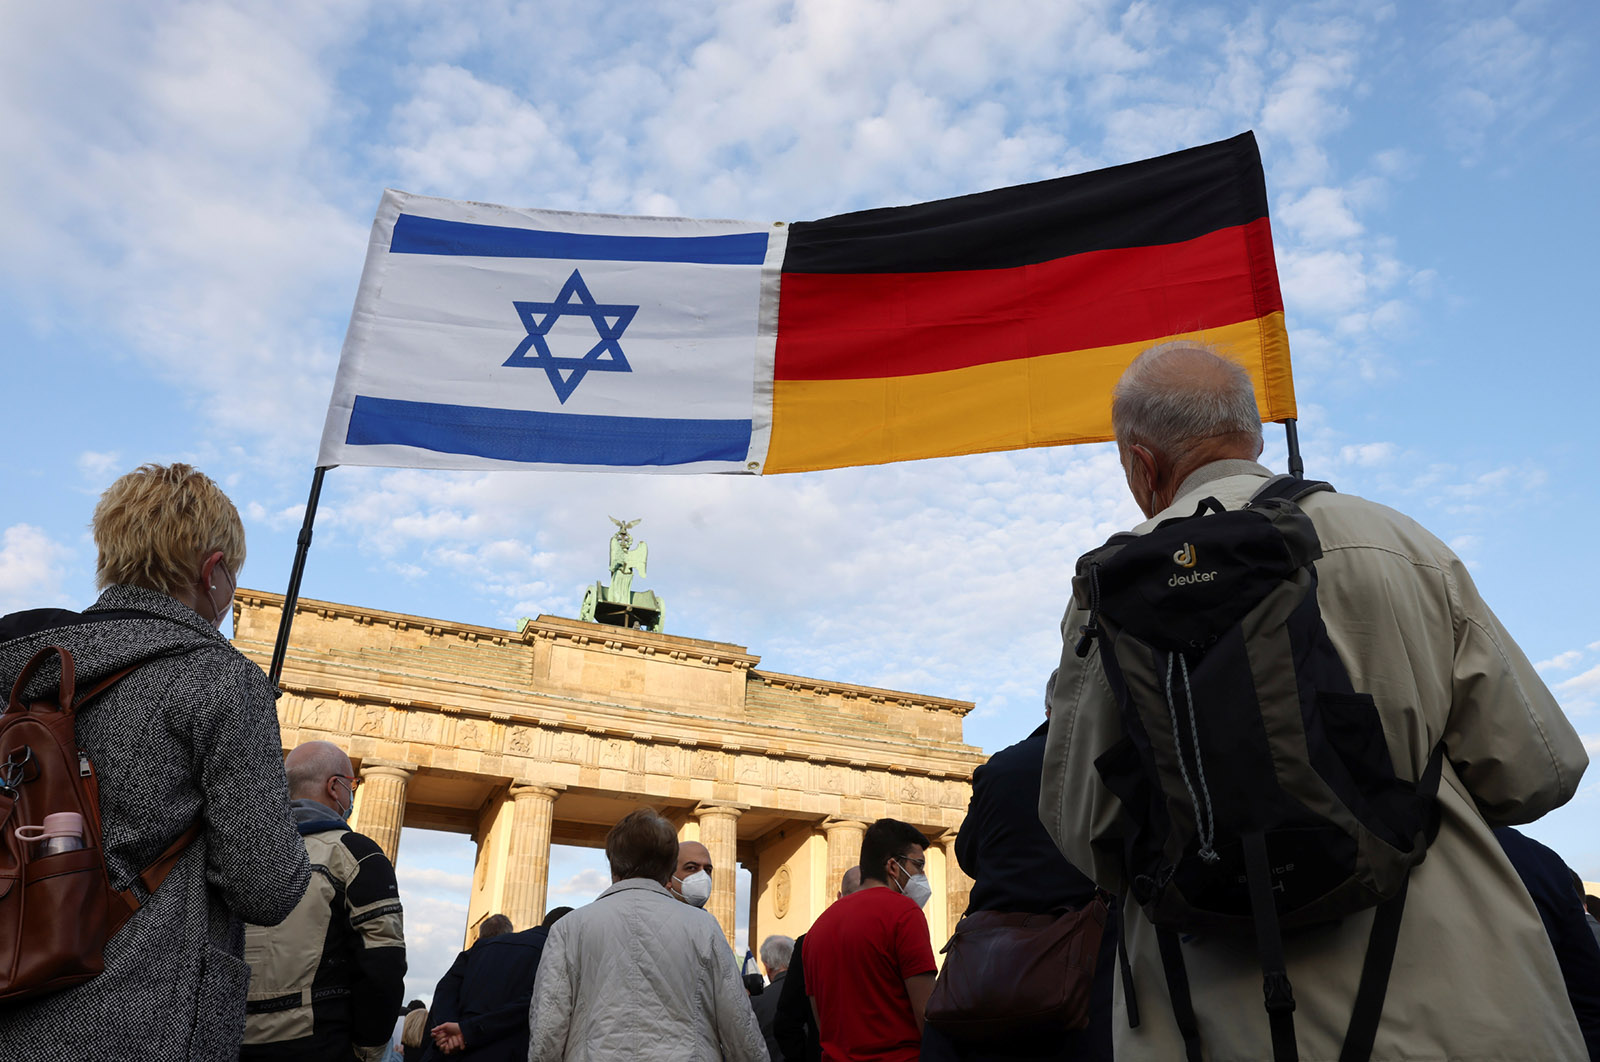 Israeli flag and German flag attached and held together in the air by protesters against antisemitism, Brandenburg Gate, Berlin